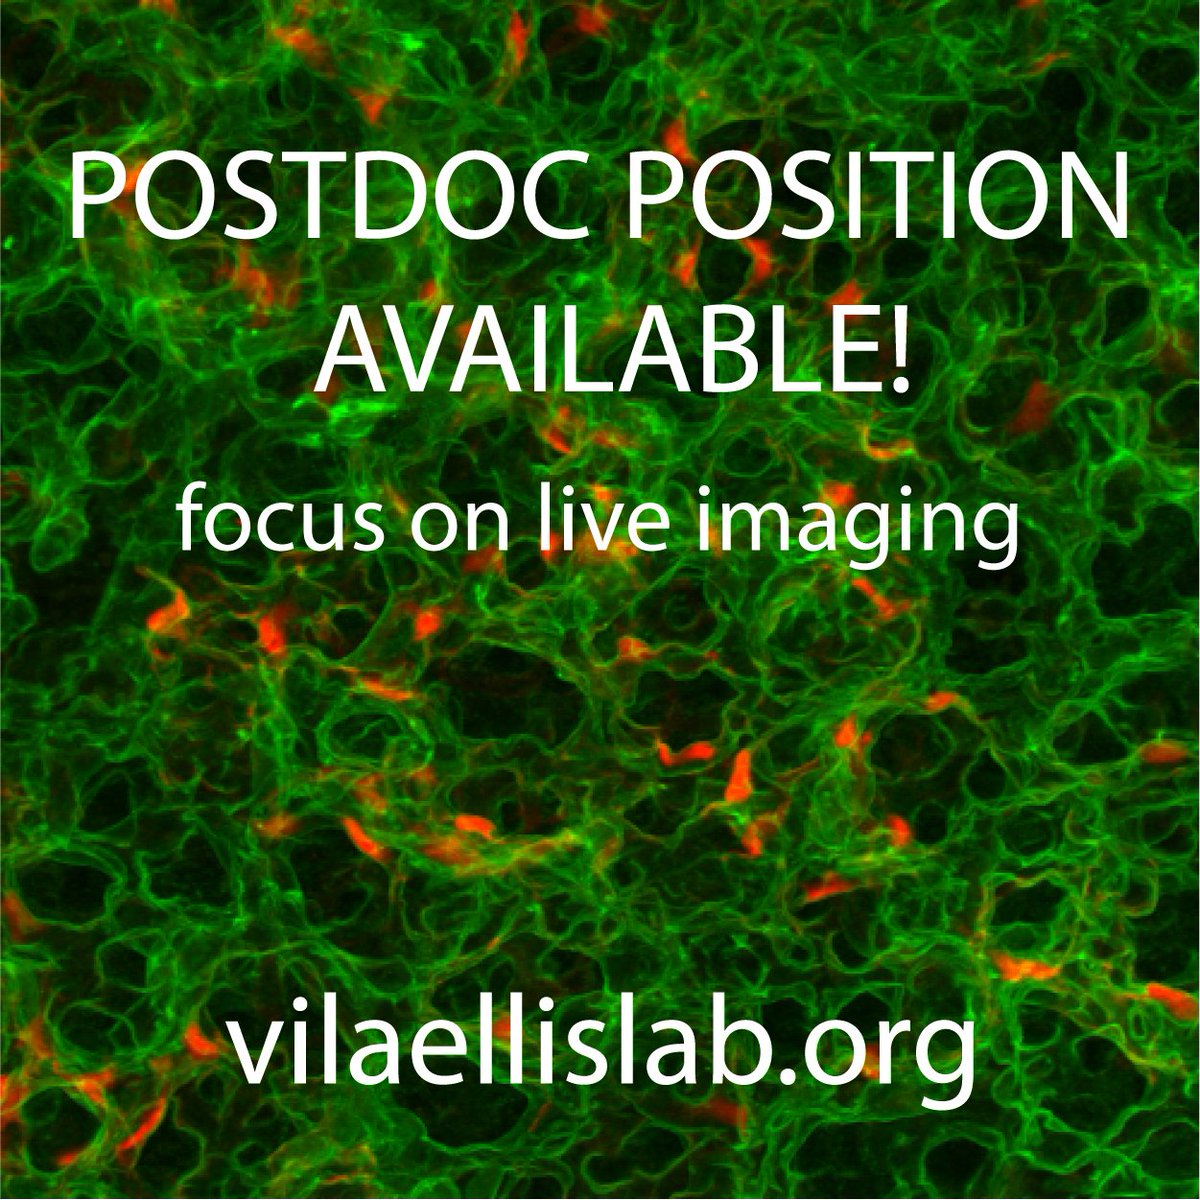 🔬 Postdoc Position Available! 🔬 🌟 The Vila Ellis lab is seeking a #postdoc with an interest in microscopy and live imaging. Please share! 💻If interested, DM or email me! vilaellislab.org 📍 Chicago, IL #ScienceJobs #PostdocJobs